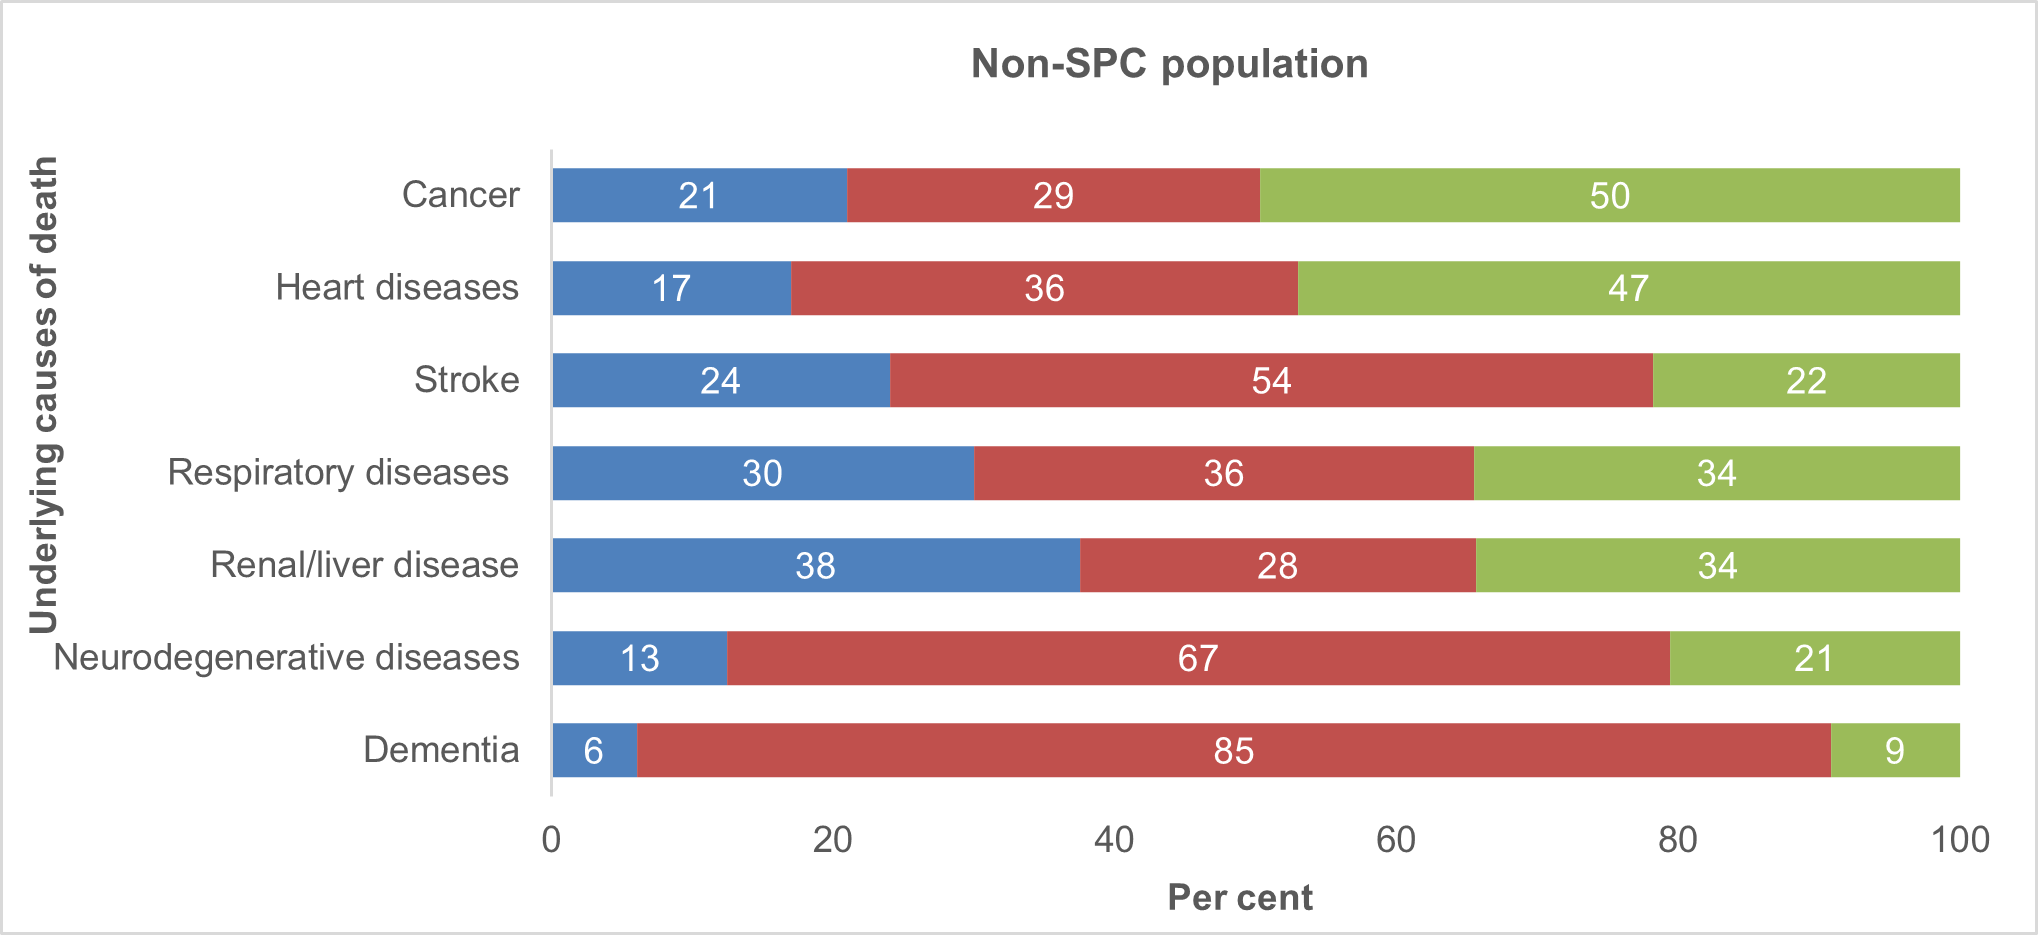 This figure shows the underlying cause of death, by place of death, for SPC and non SPC populations. Locations include inpatient hospital care, residential aged care and the emergency department.